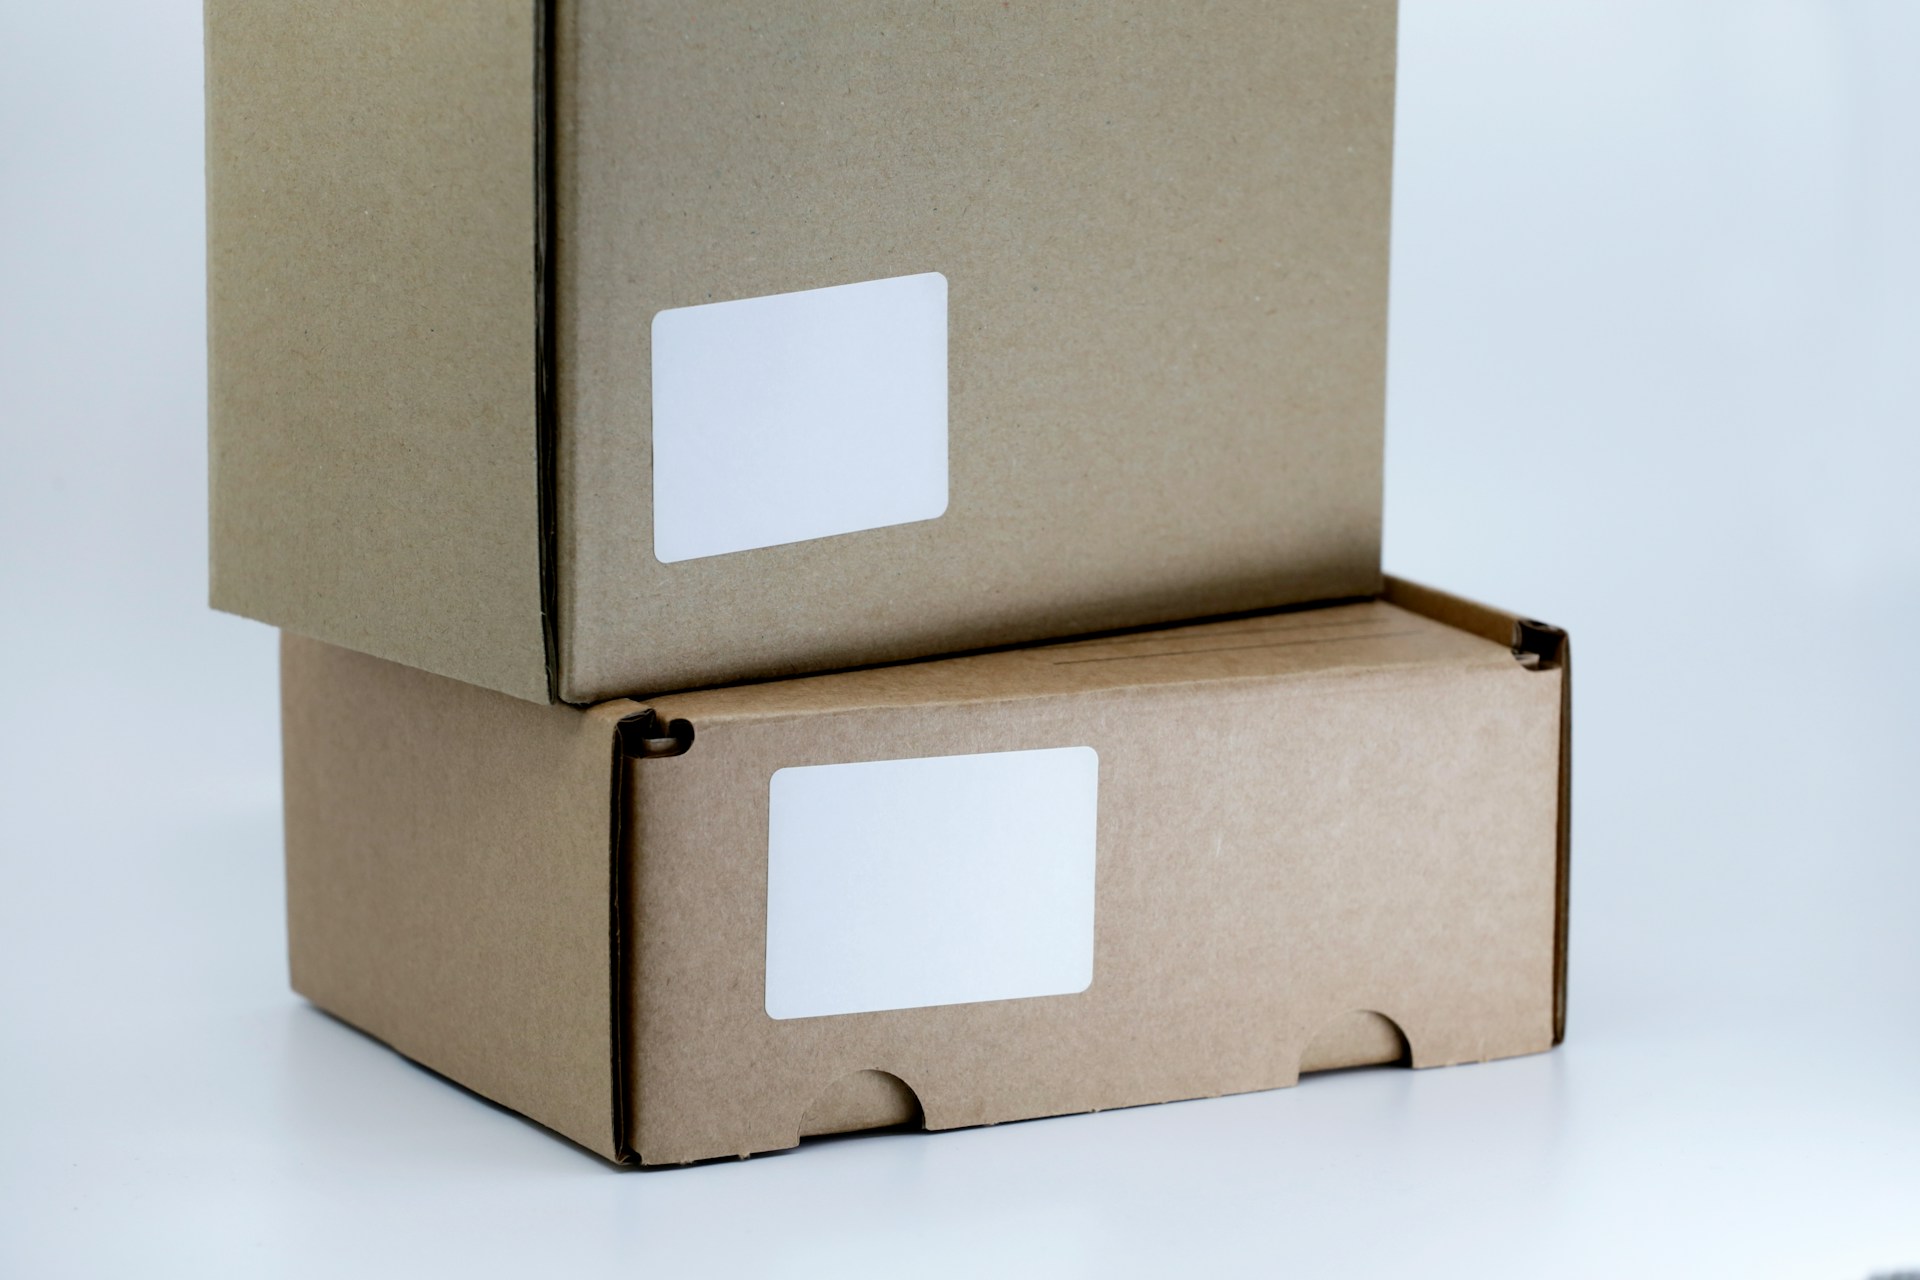 Two plain shipping boxes with blank labels for Amazon FBA vs dropshipping.